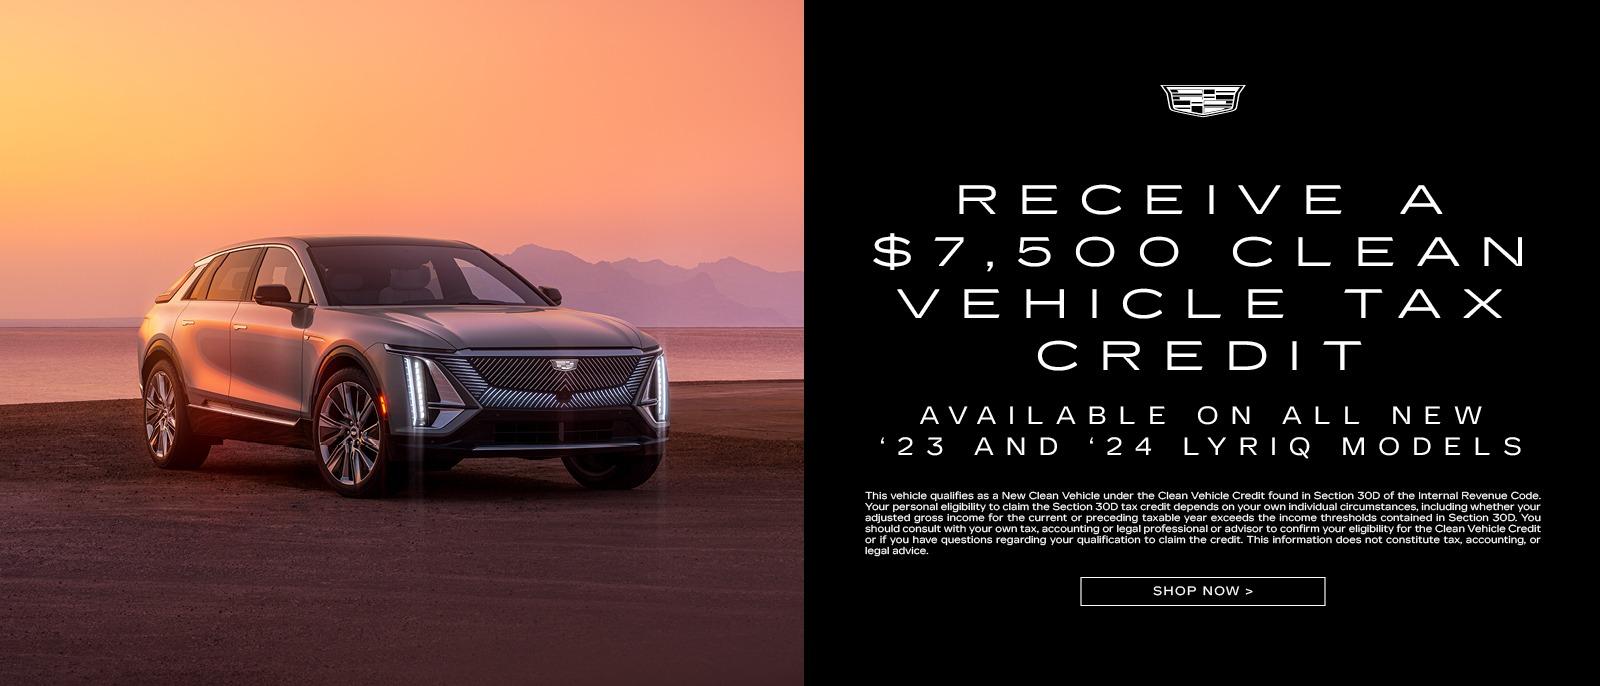 RECEIVE A $7,500 CLEAN VEHICLE TAX CREDIT 
AVAILABLE ON ALL NEW 23 AND 24 LYRIQ MODELS